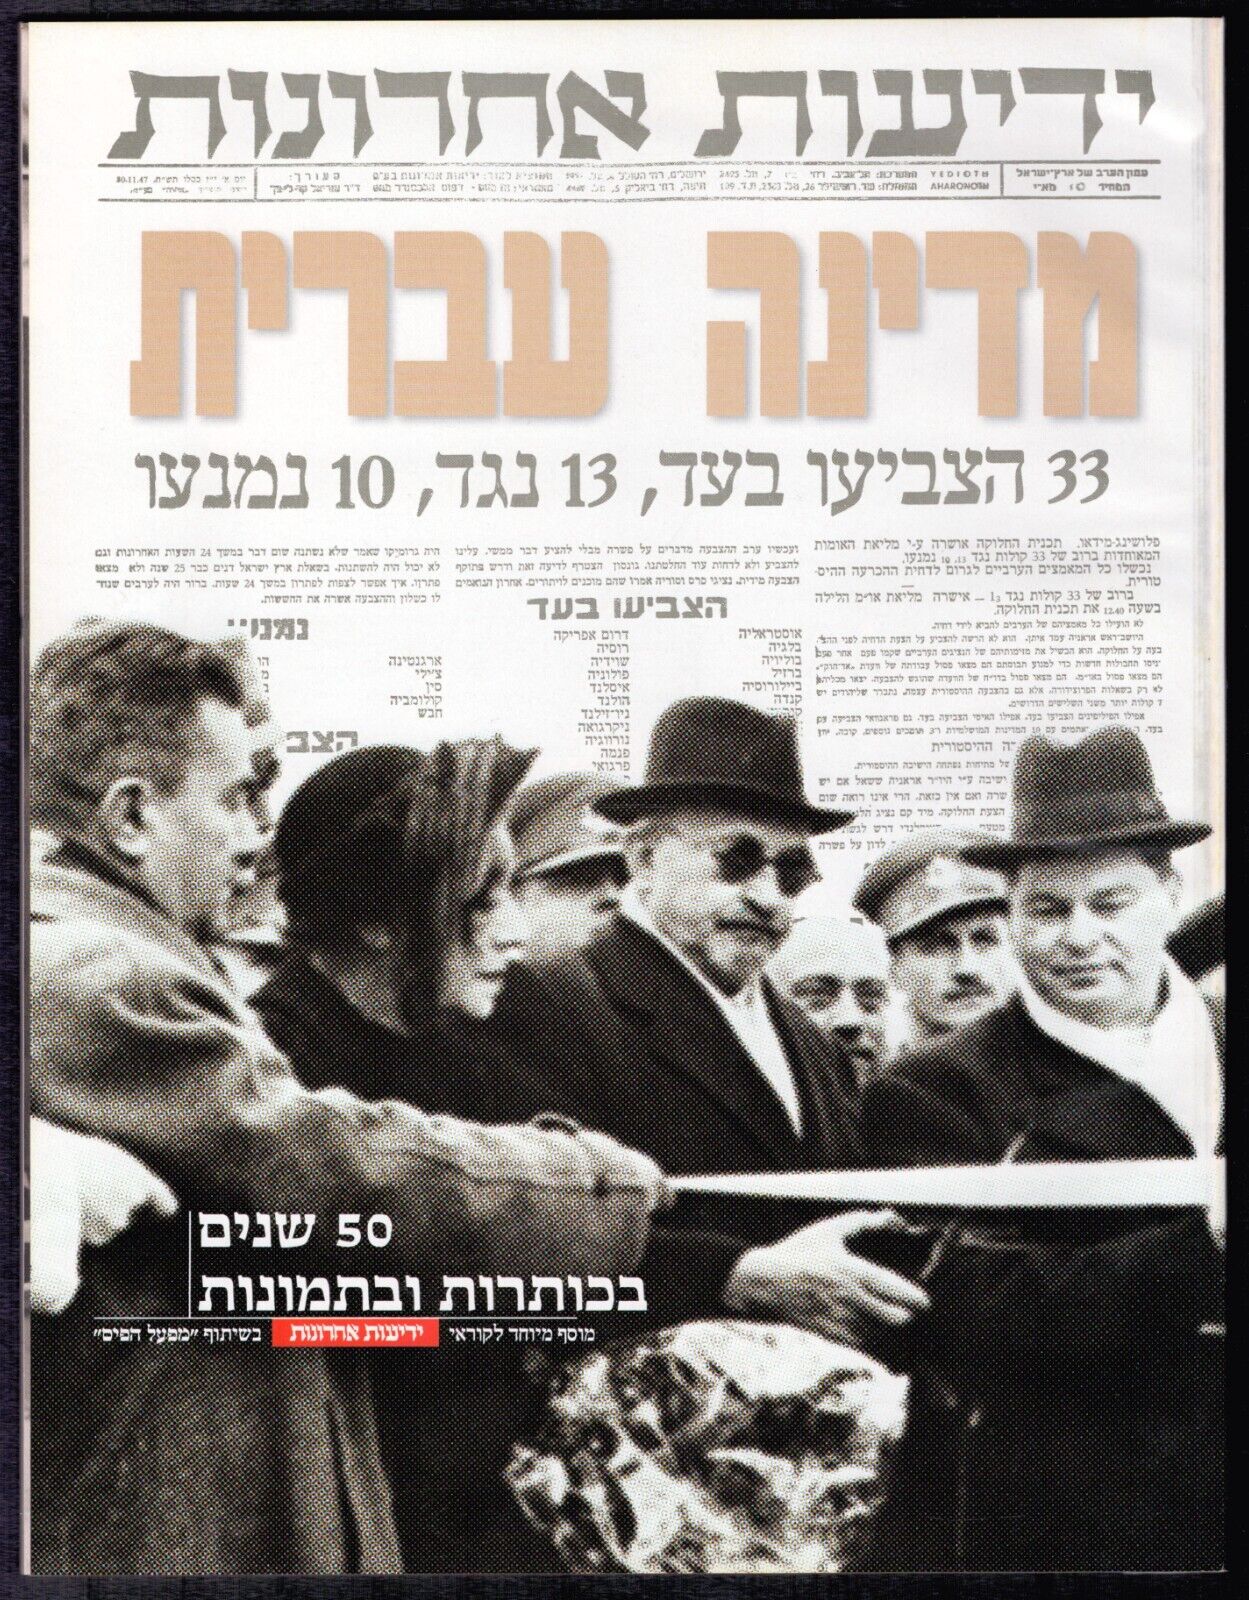 50 years of Israel, headlines and photos Yedioth Ahronoth, special issue 1998